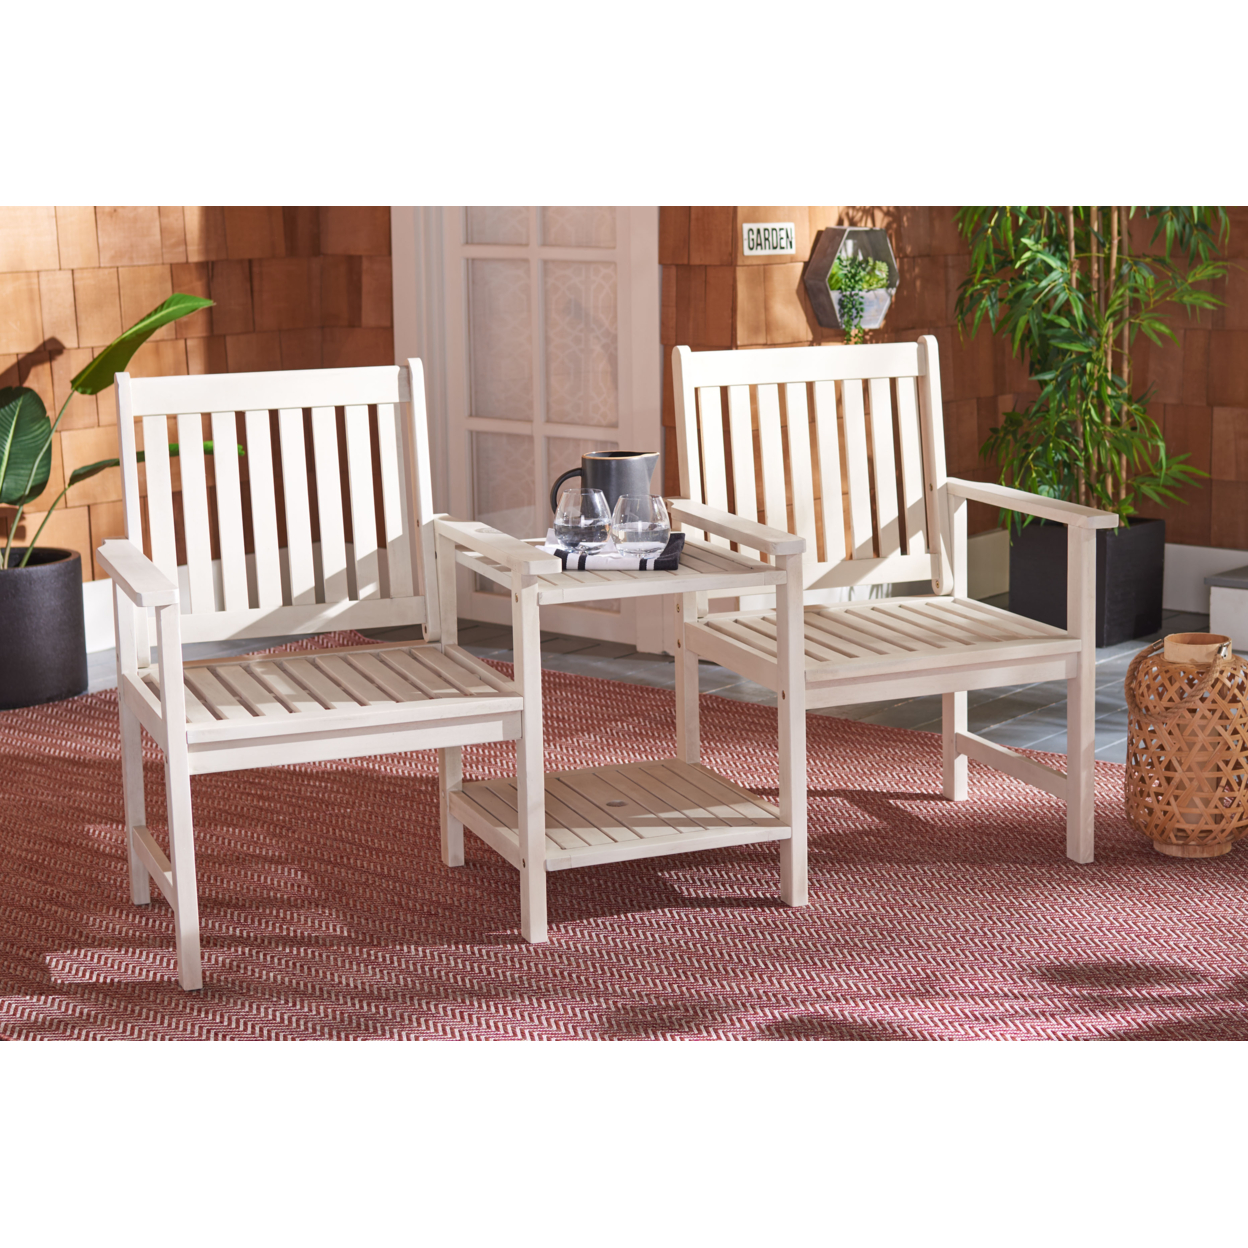 SAFAVIEH Outdoor Collection Brea Twin Seat Bench White